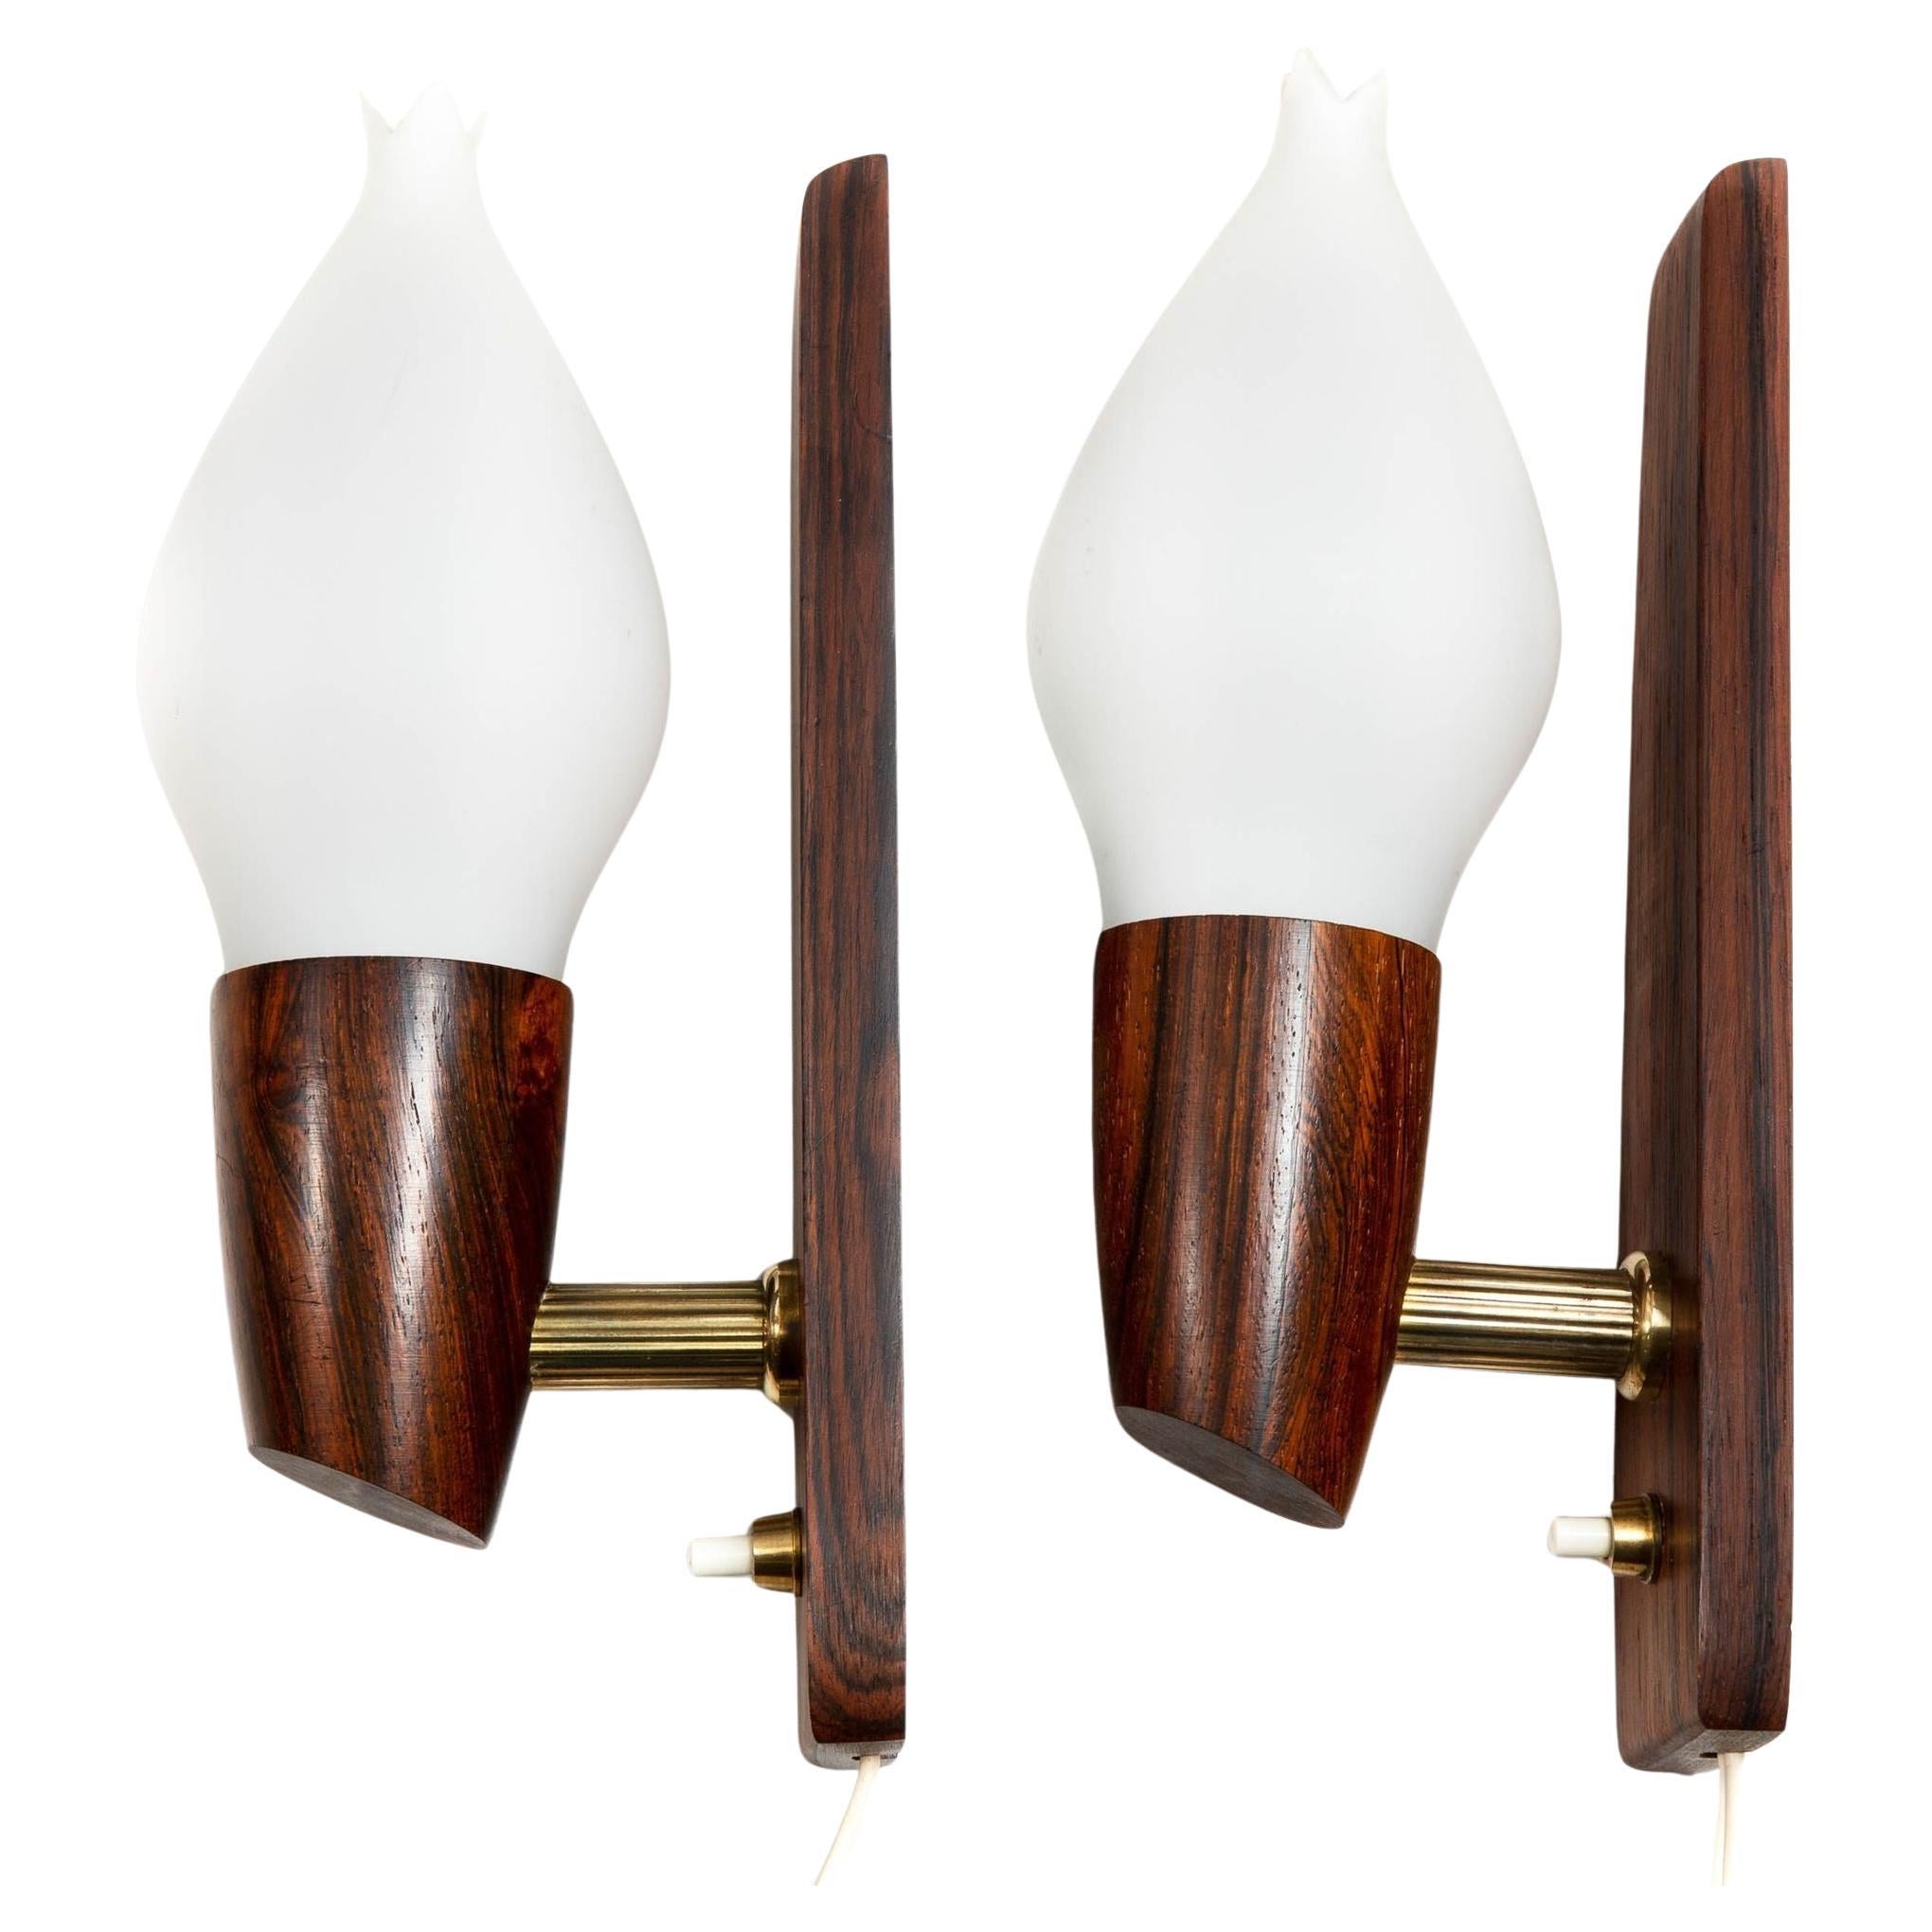 Pair of Danish Modern Rosewood Wall Sconces by Vitrika circa 1970s